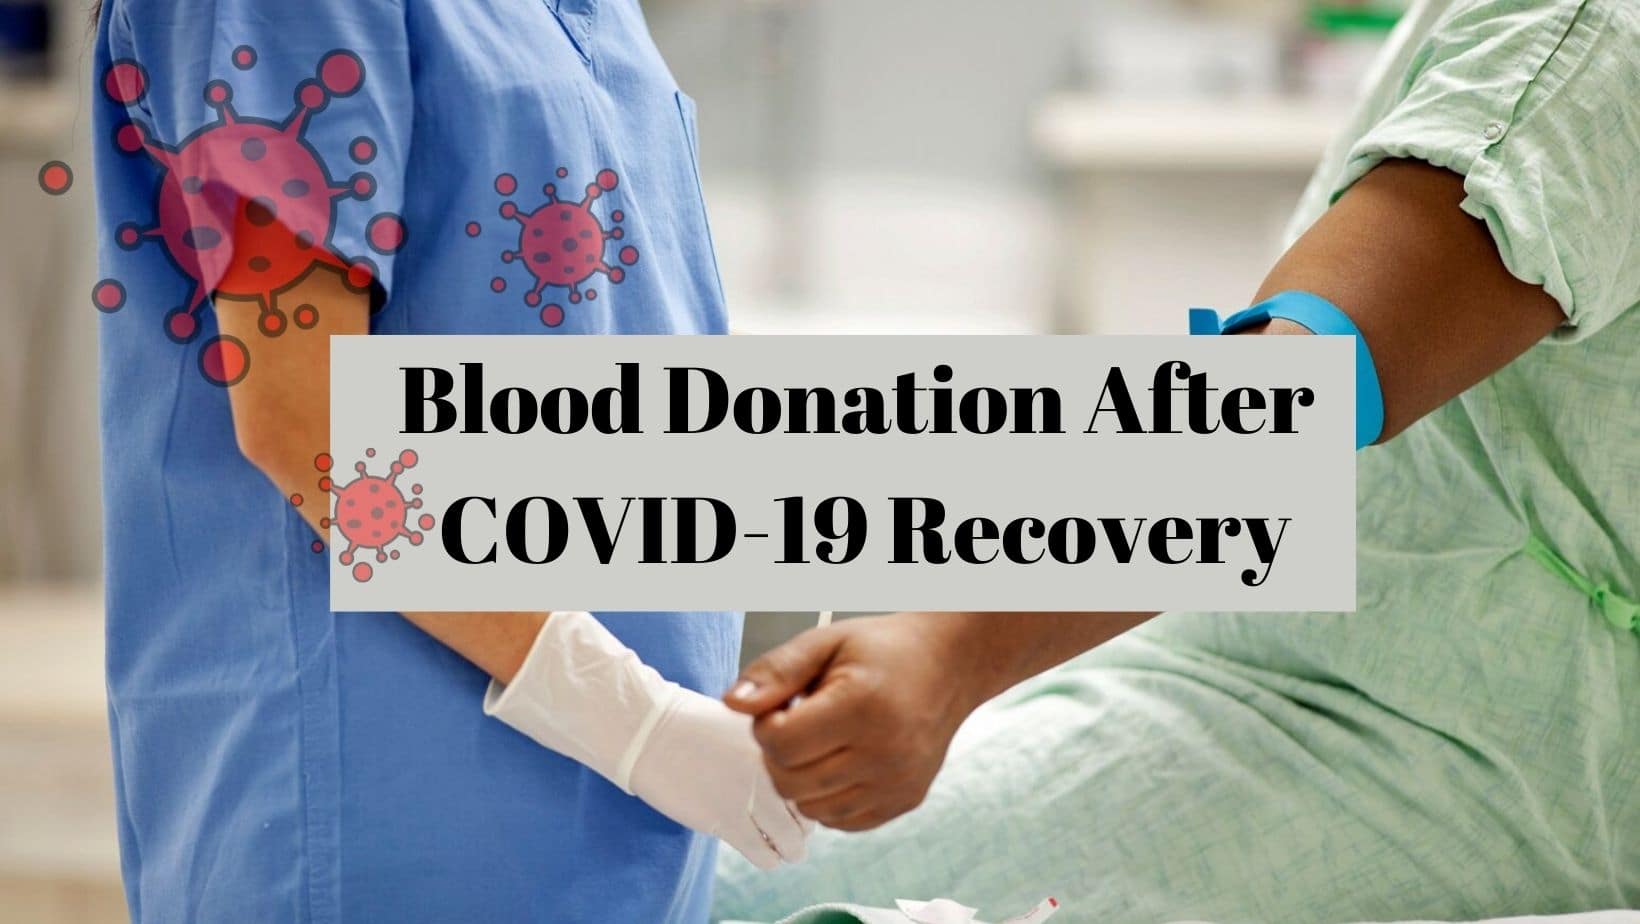 Can You Donate Blood If You Have Had COVID-19?